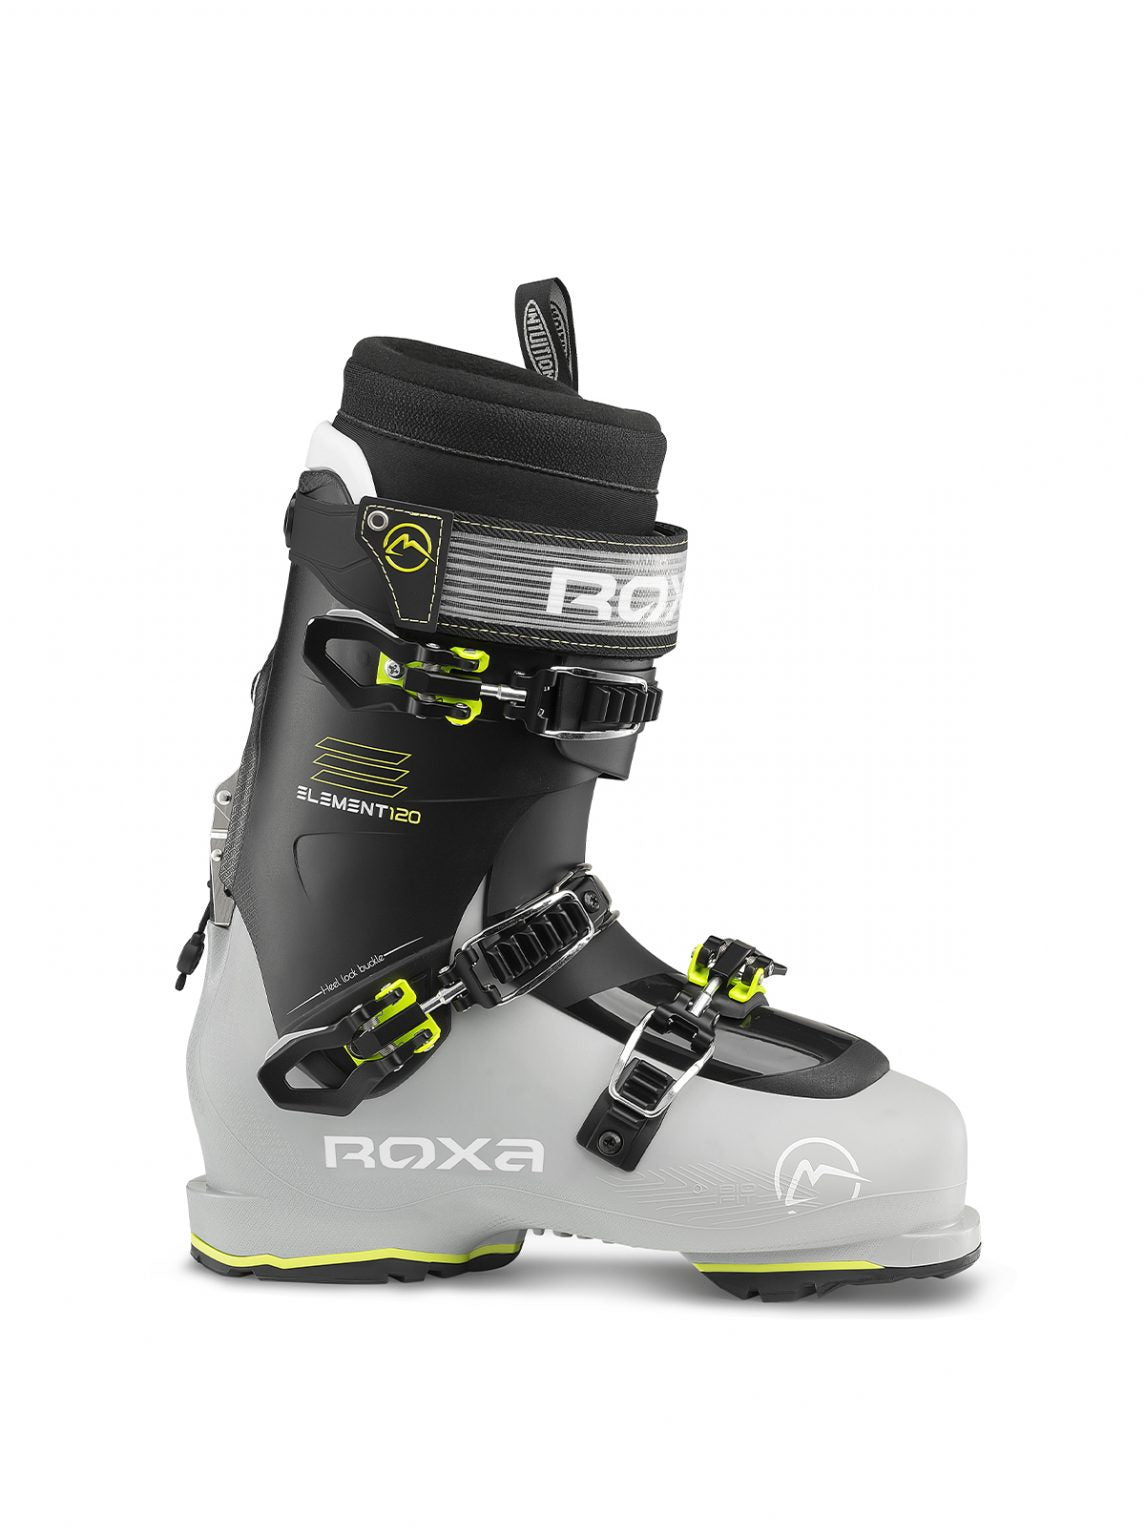 Men's downhill ski boot with a grey lower piece and black cuff with 4 buckles by Roxa ski boots